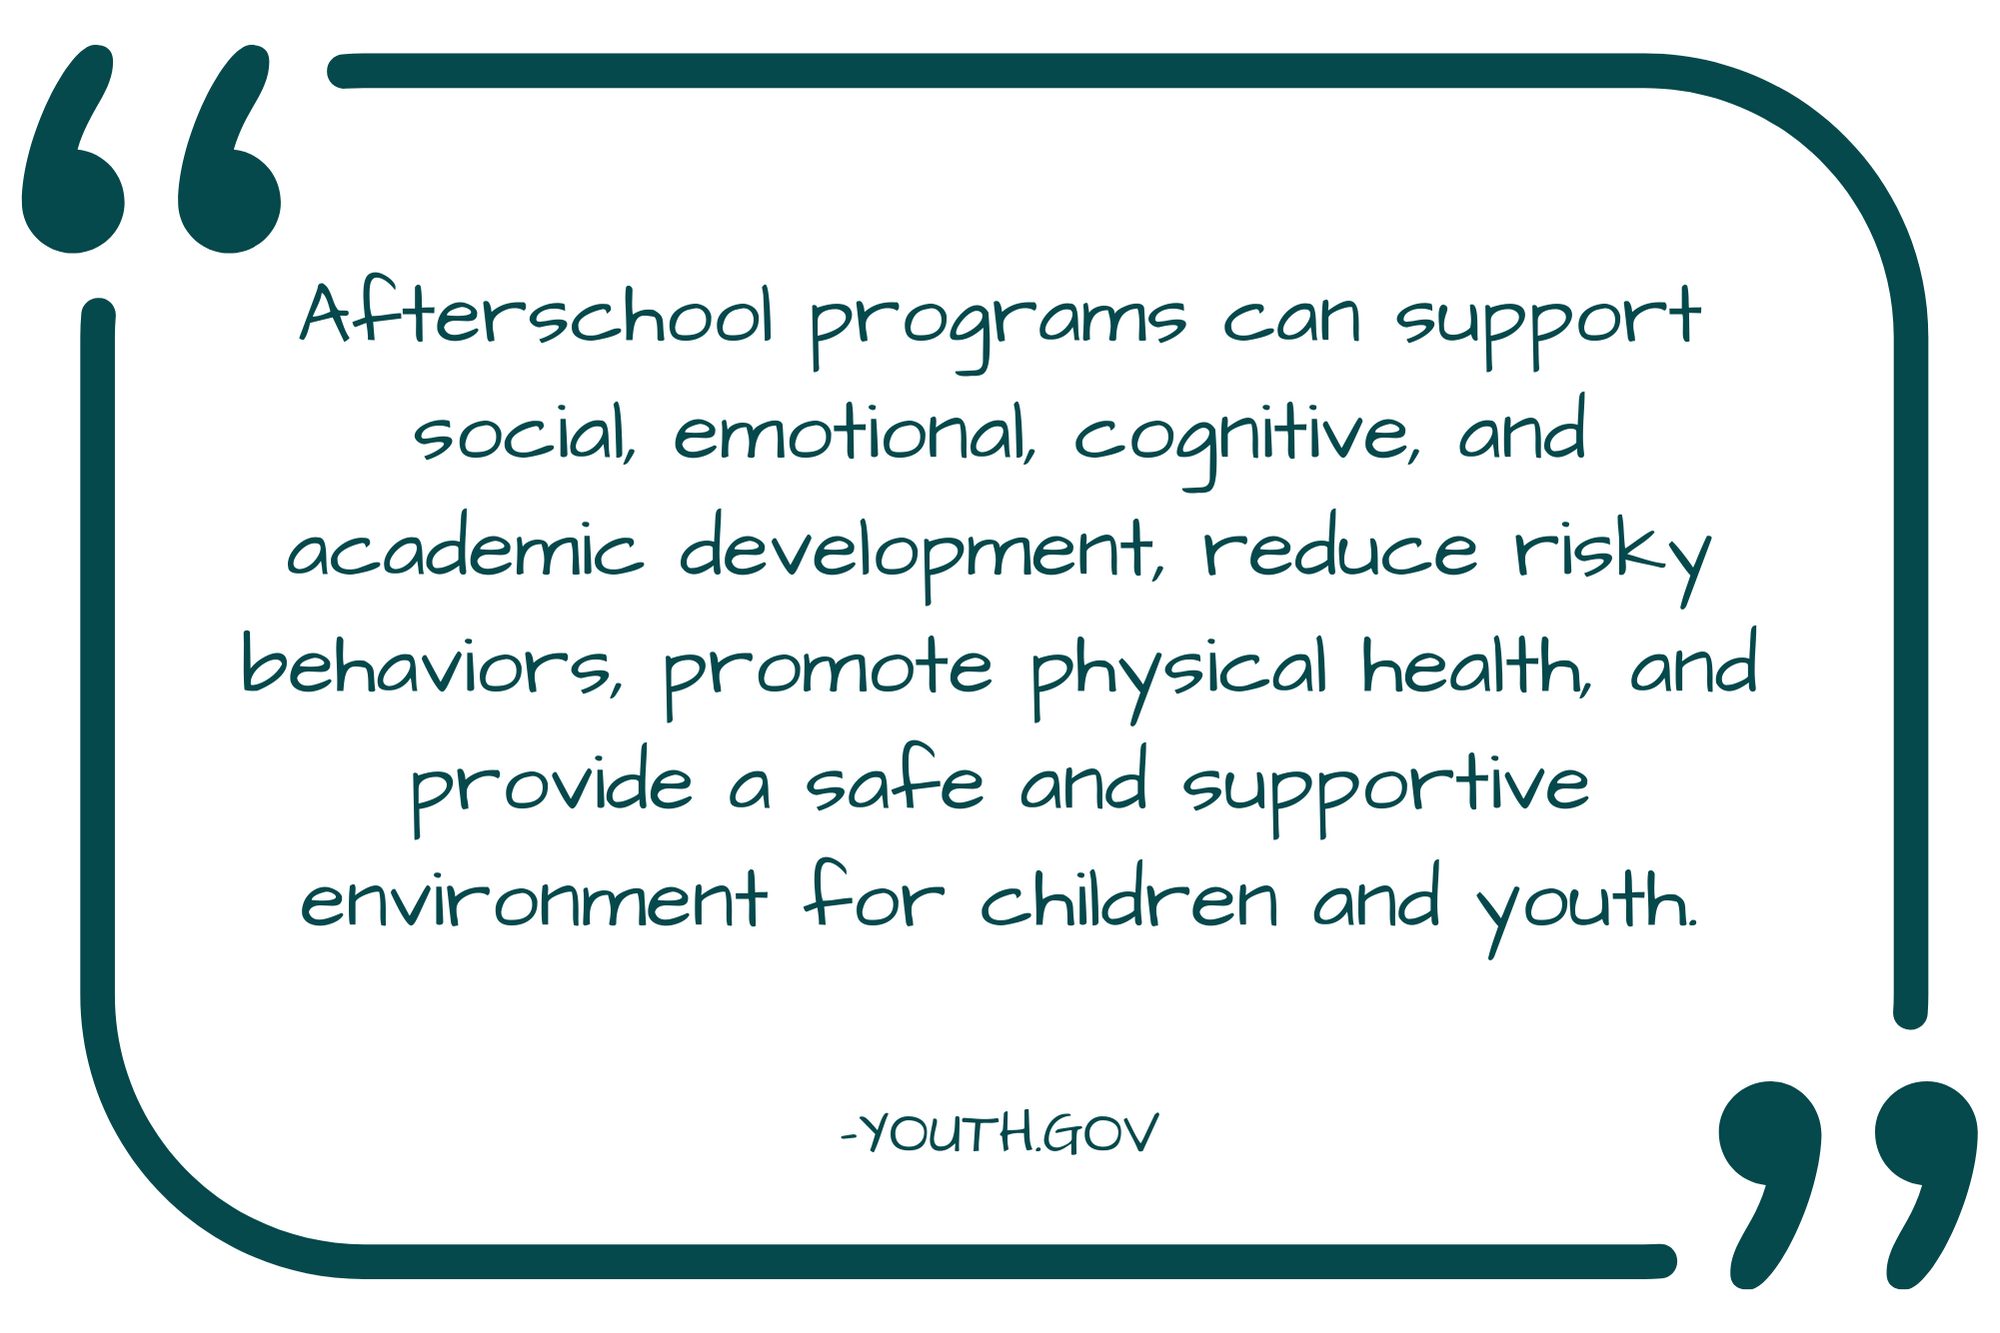 Afterschool programs can support social, emotional, cognitive, and academic development, reduce risky behaviors, promote physical health, and provide a safe and supportive environment for children and youth.